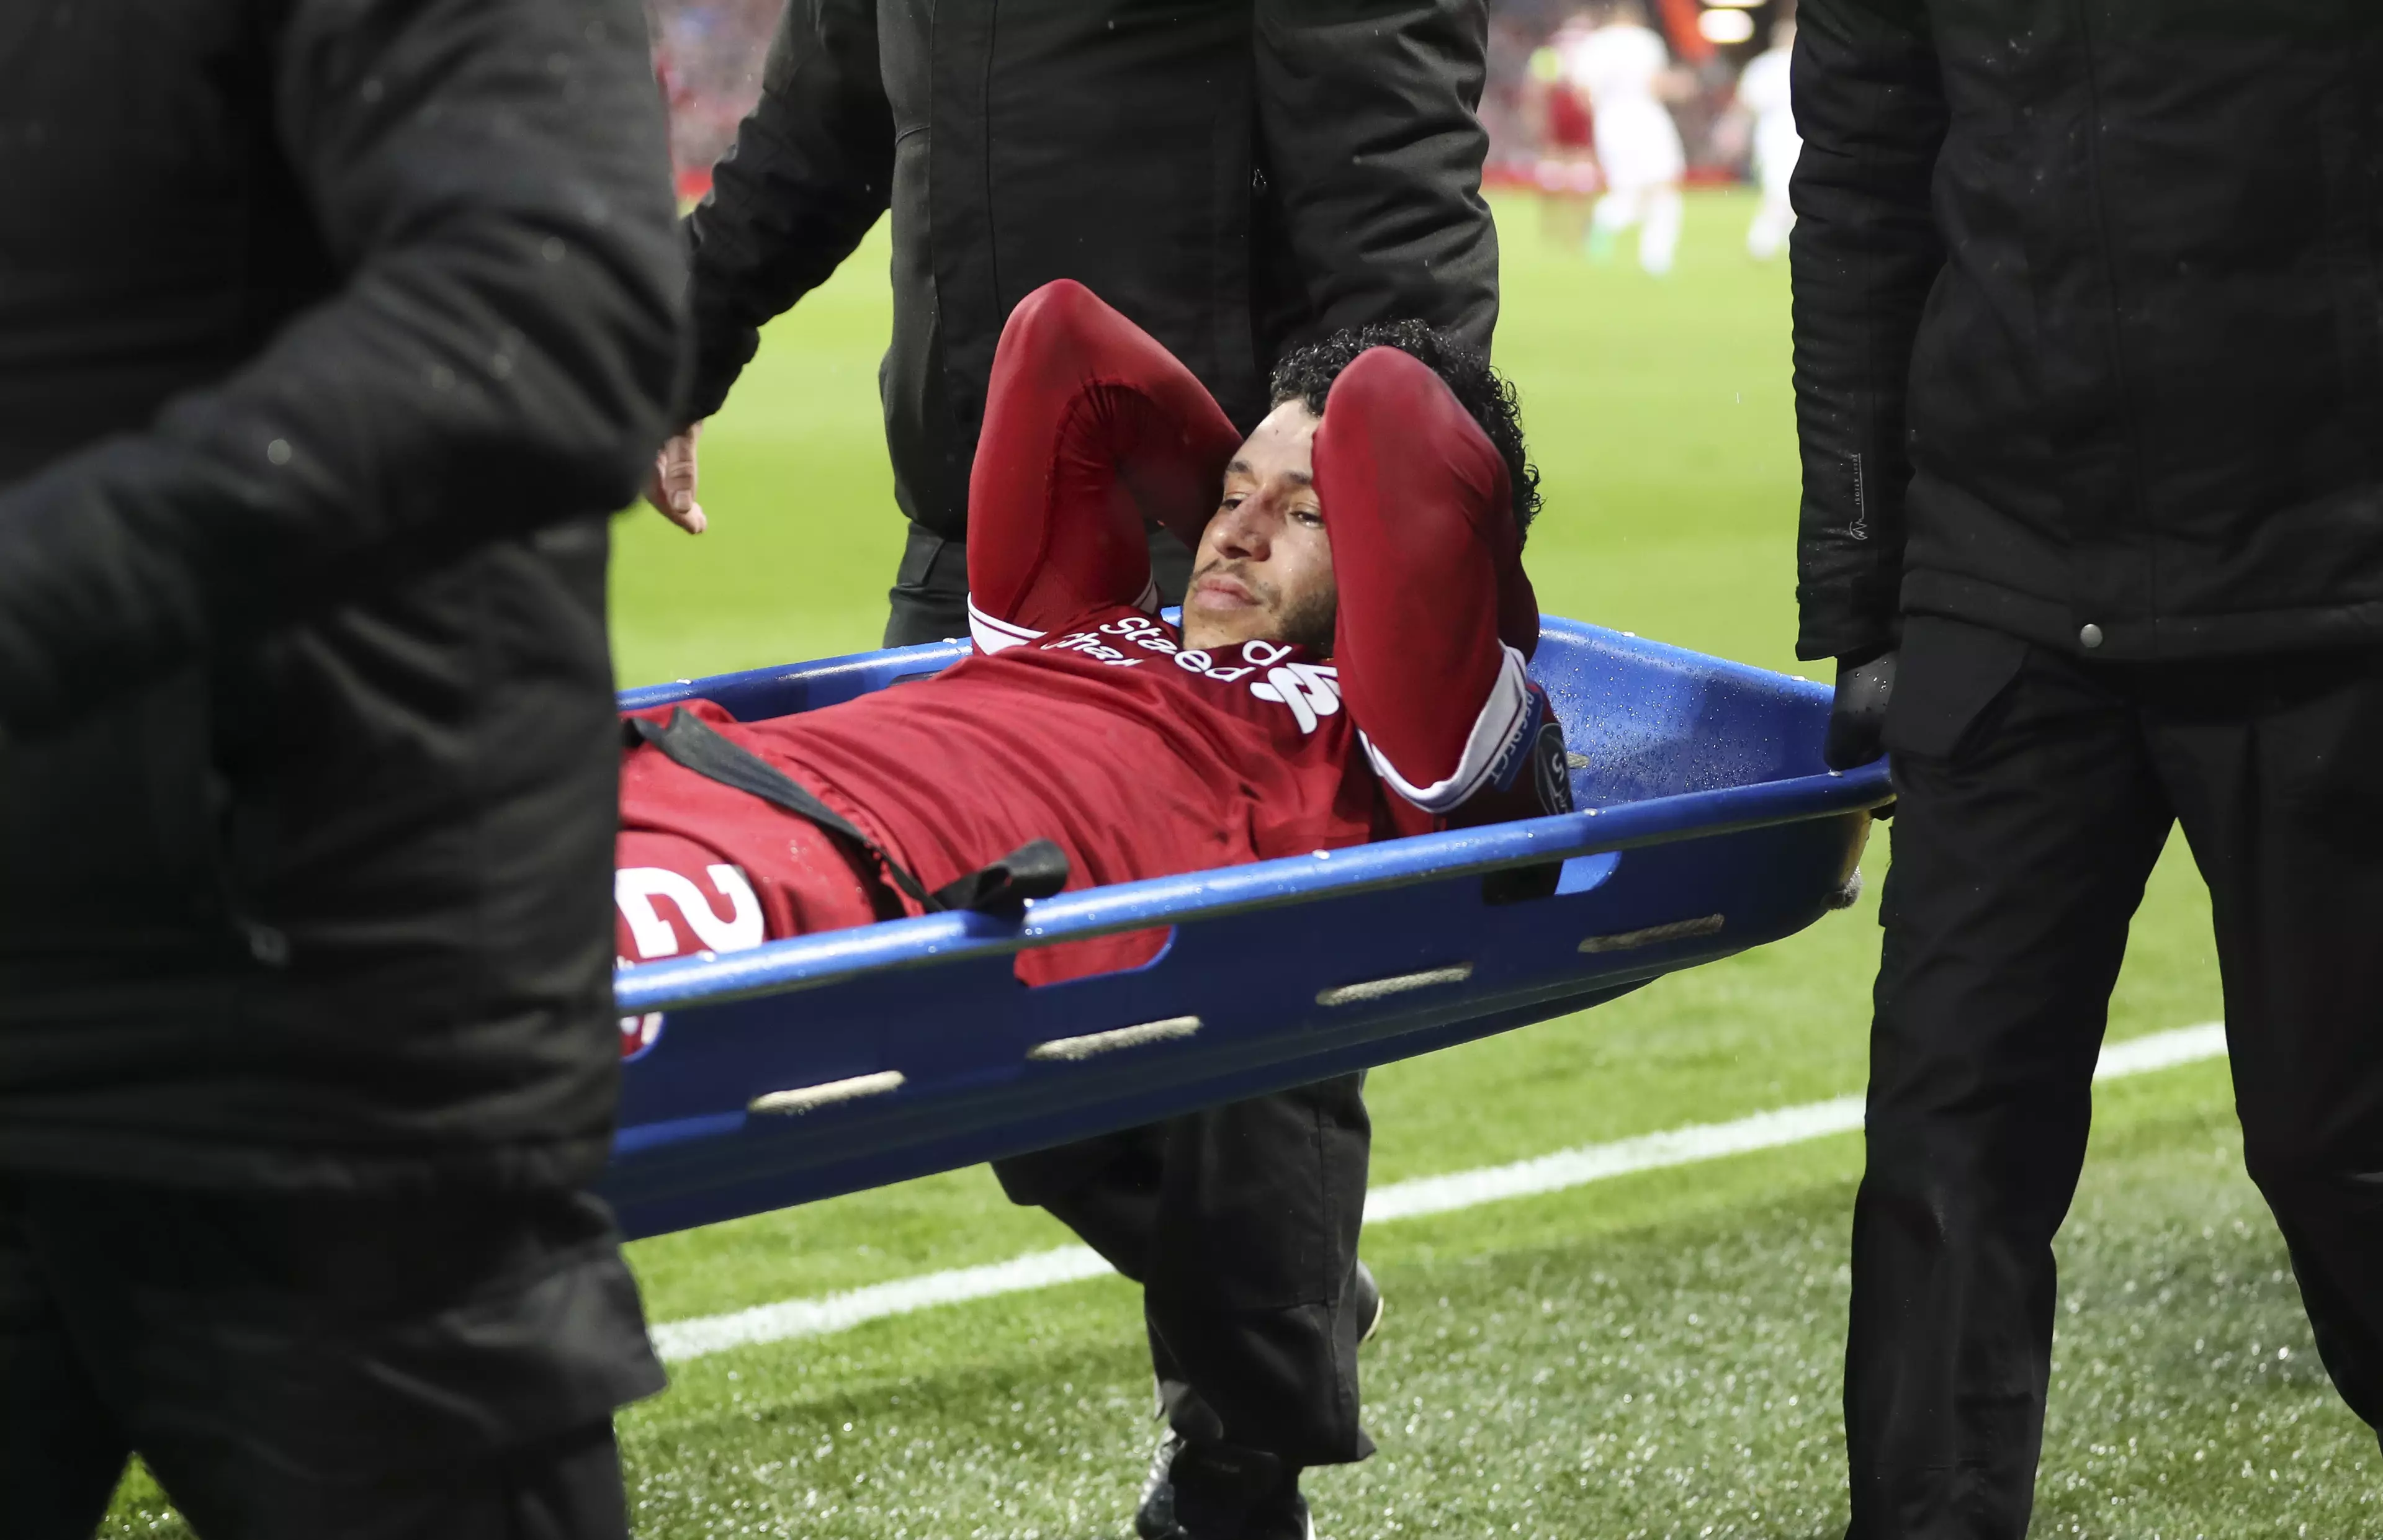 Chamberlain's injury is a huge blow for England. Image: PA Images